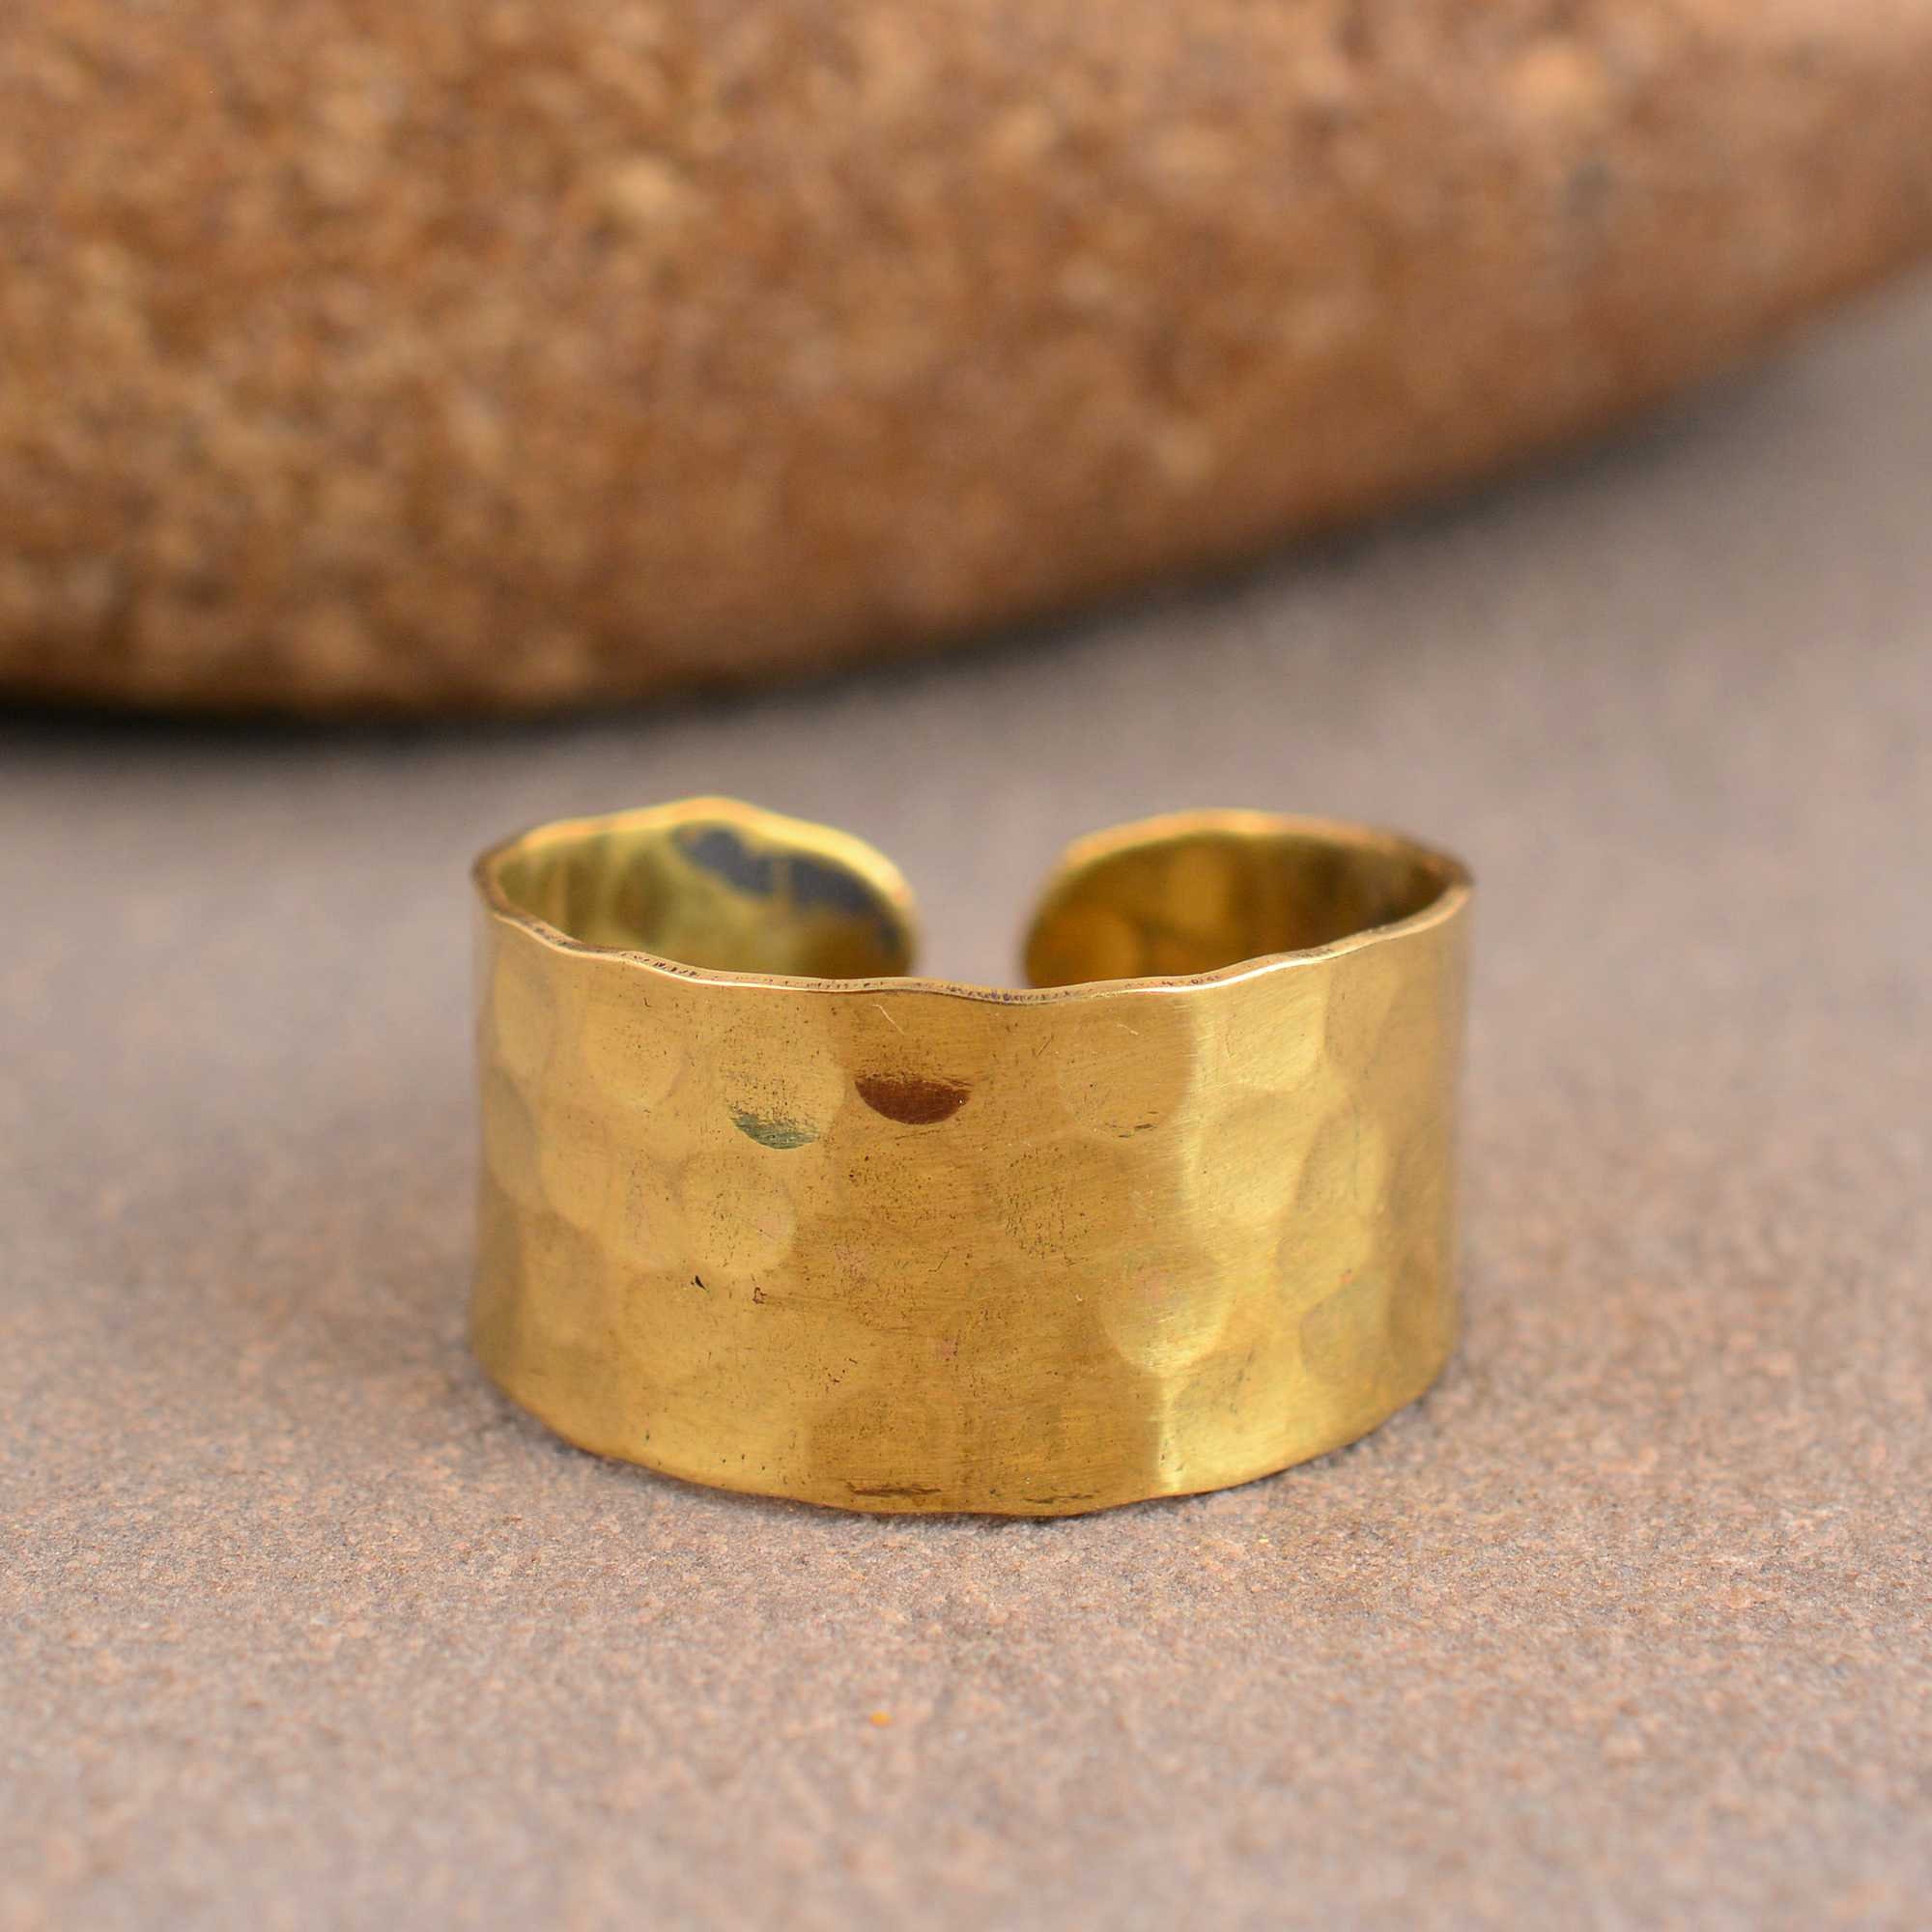 Buy Gold Nature's Art Cuff Bracelet by ZARIIN at Ogaan Online Shopping Site